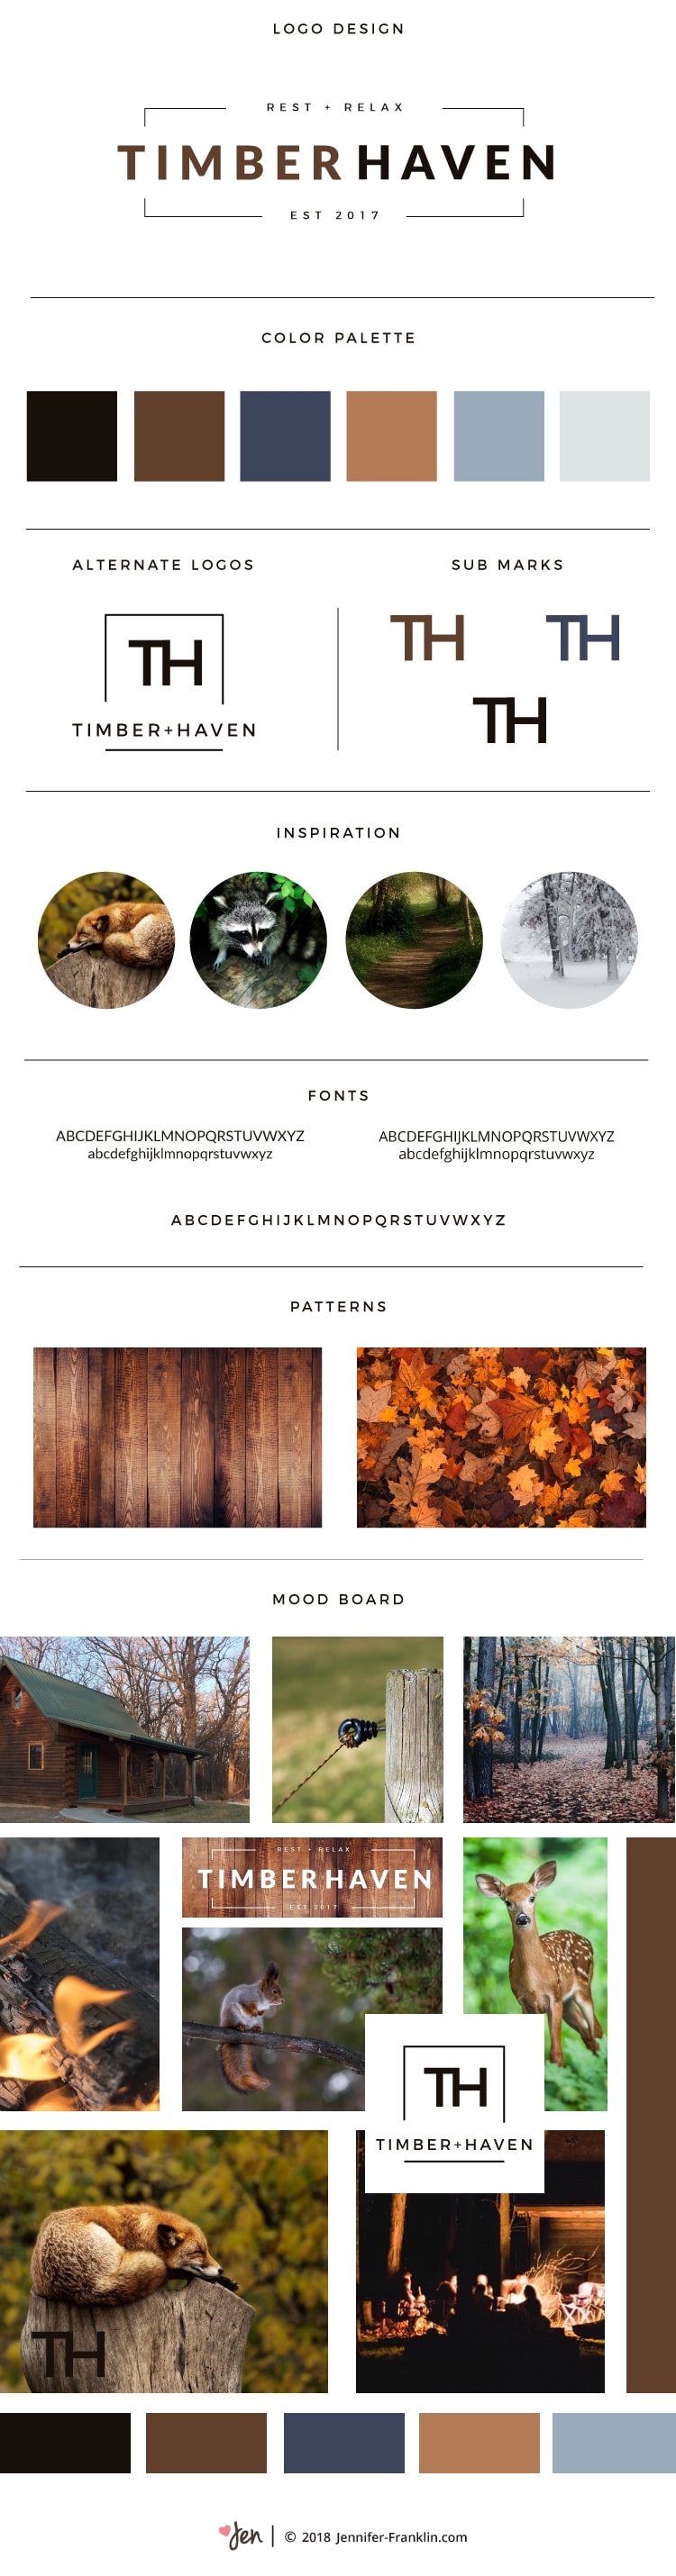 timber-haven-brand-board-sample-01